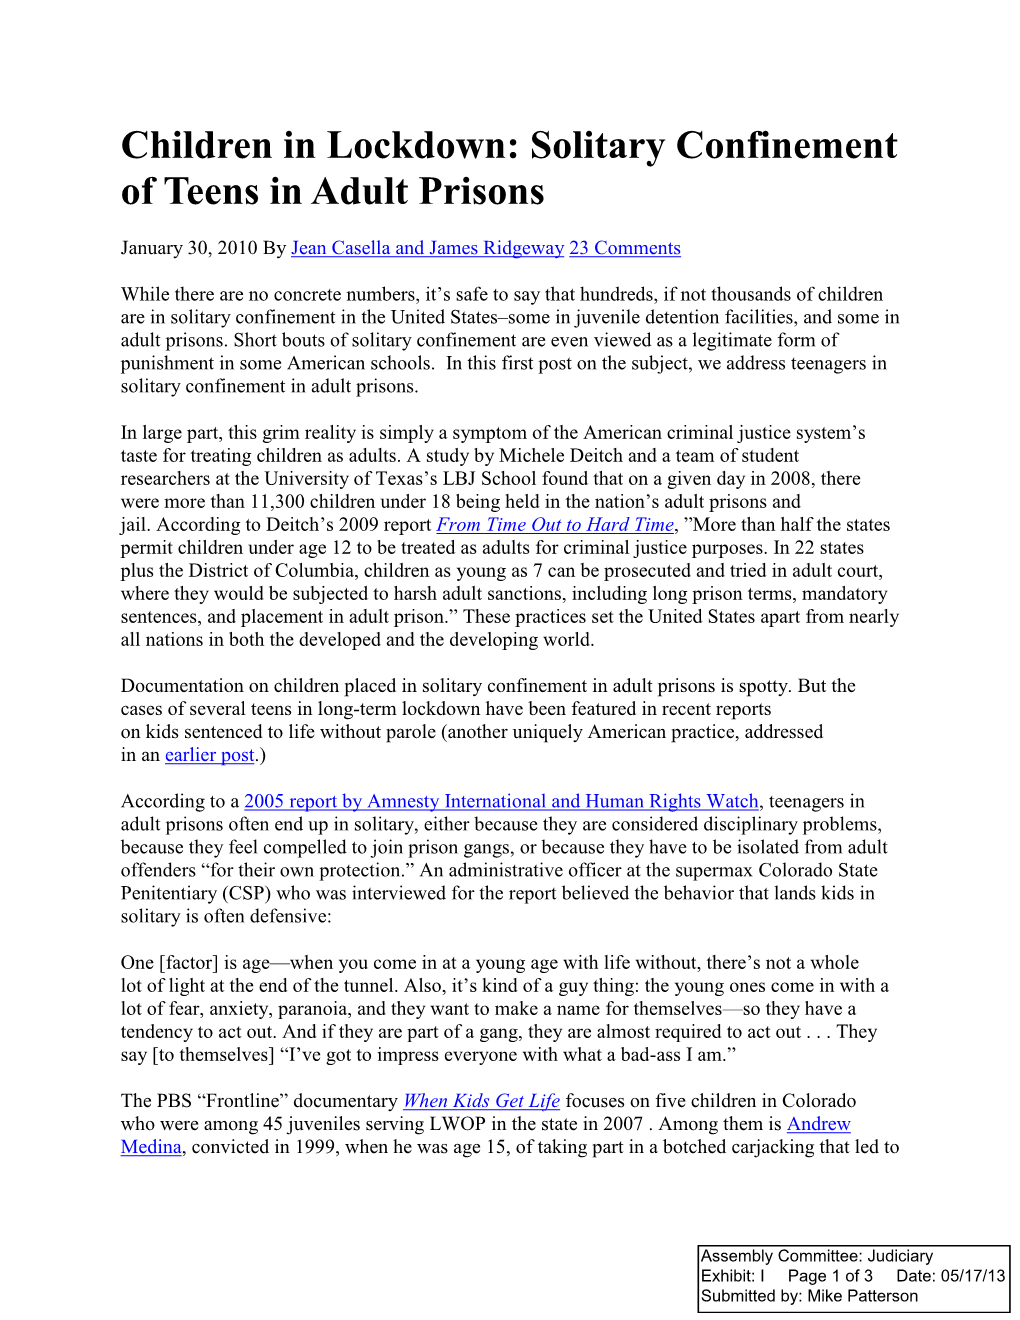 Solitary Confinement of Teens in Adult Prisons